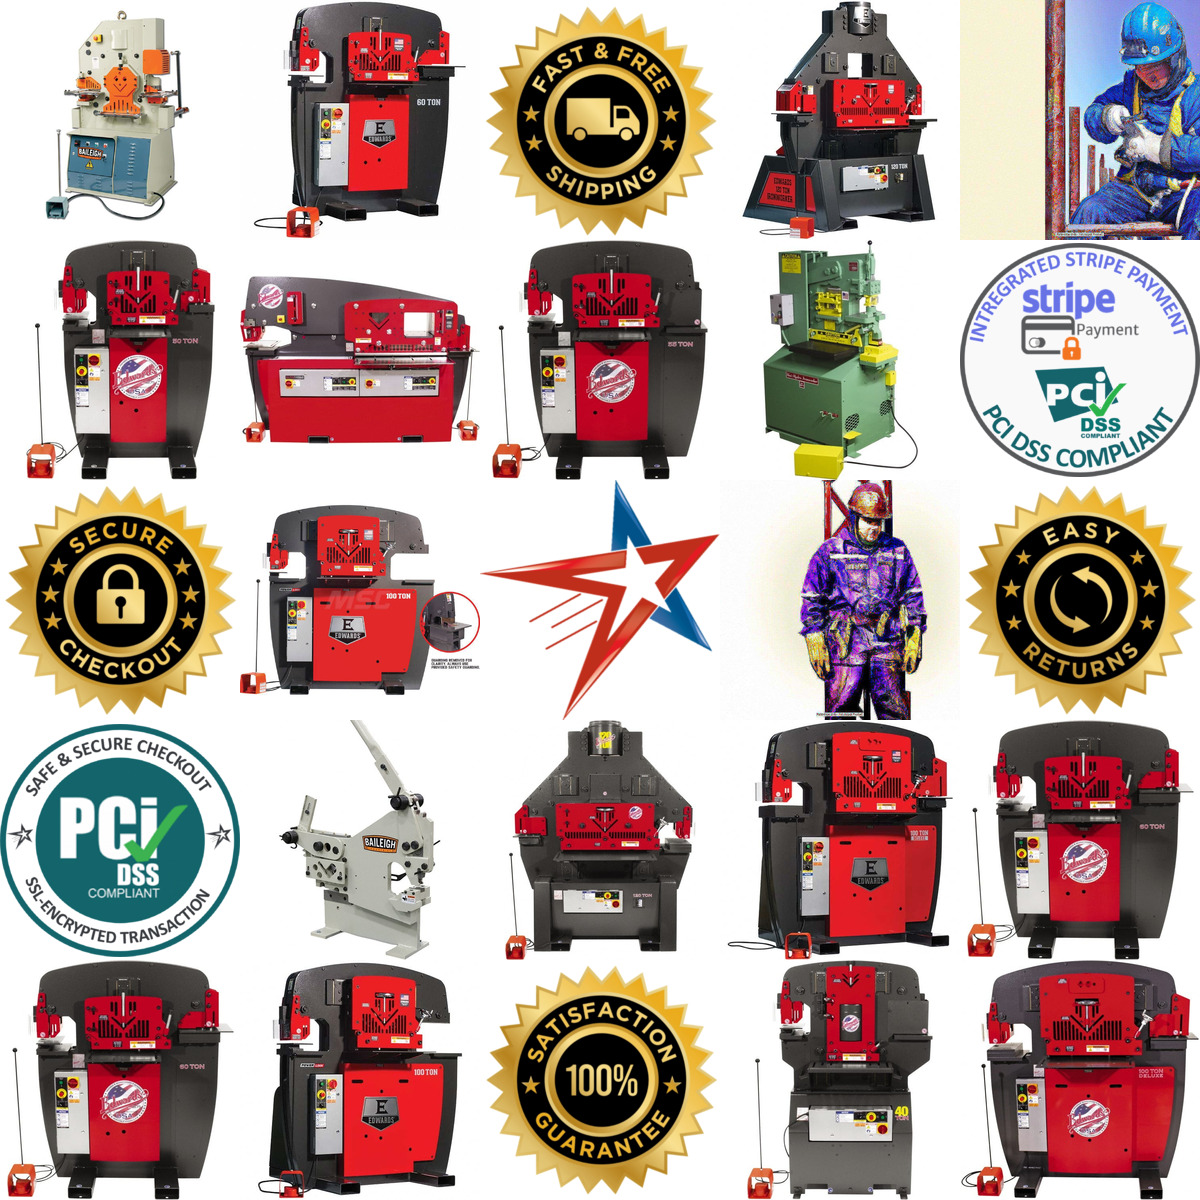 A selection of Ironworkers products on GoVets